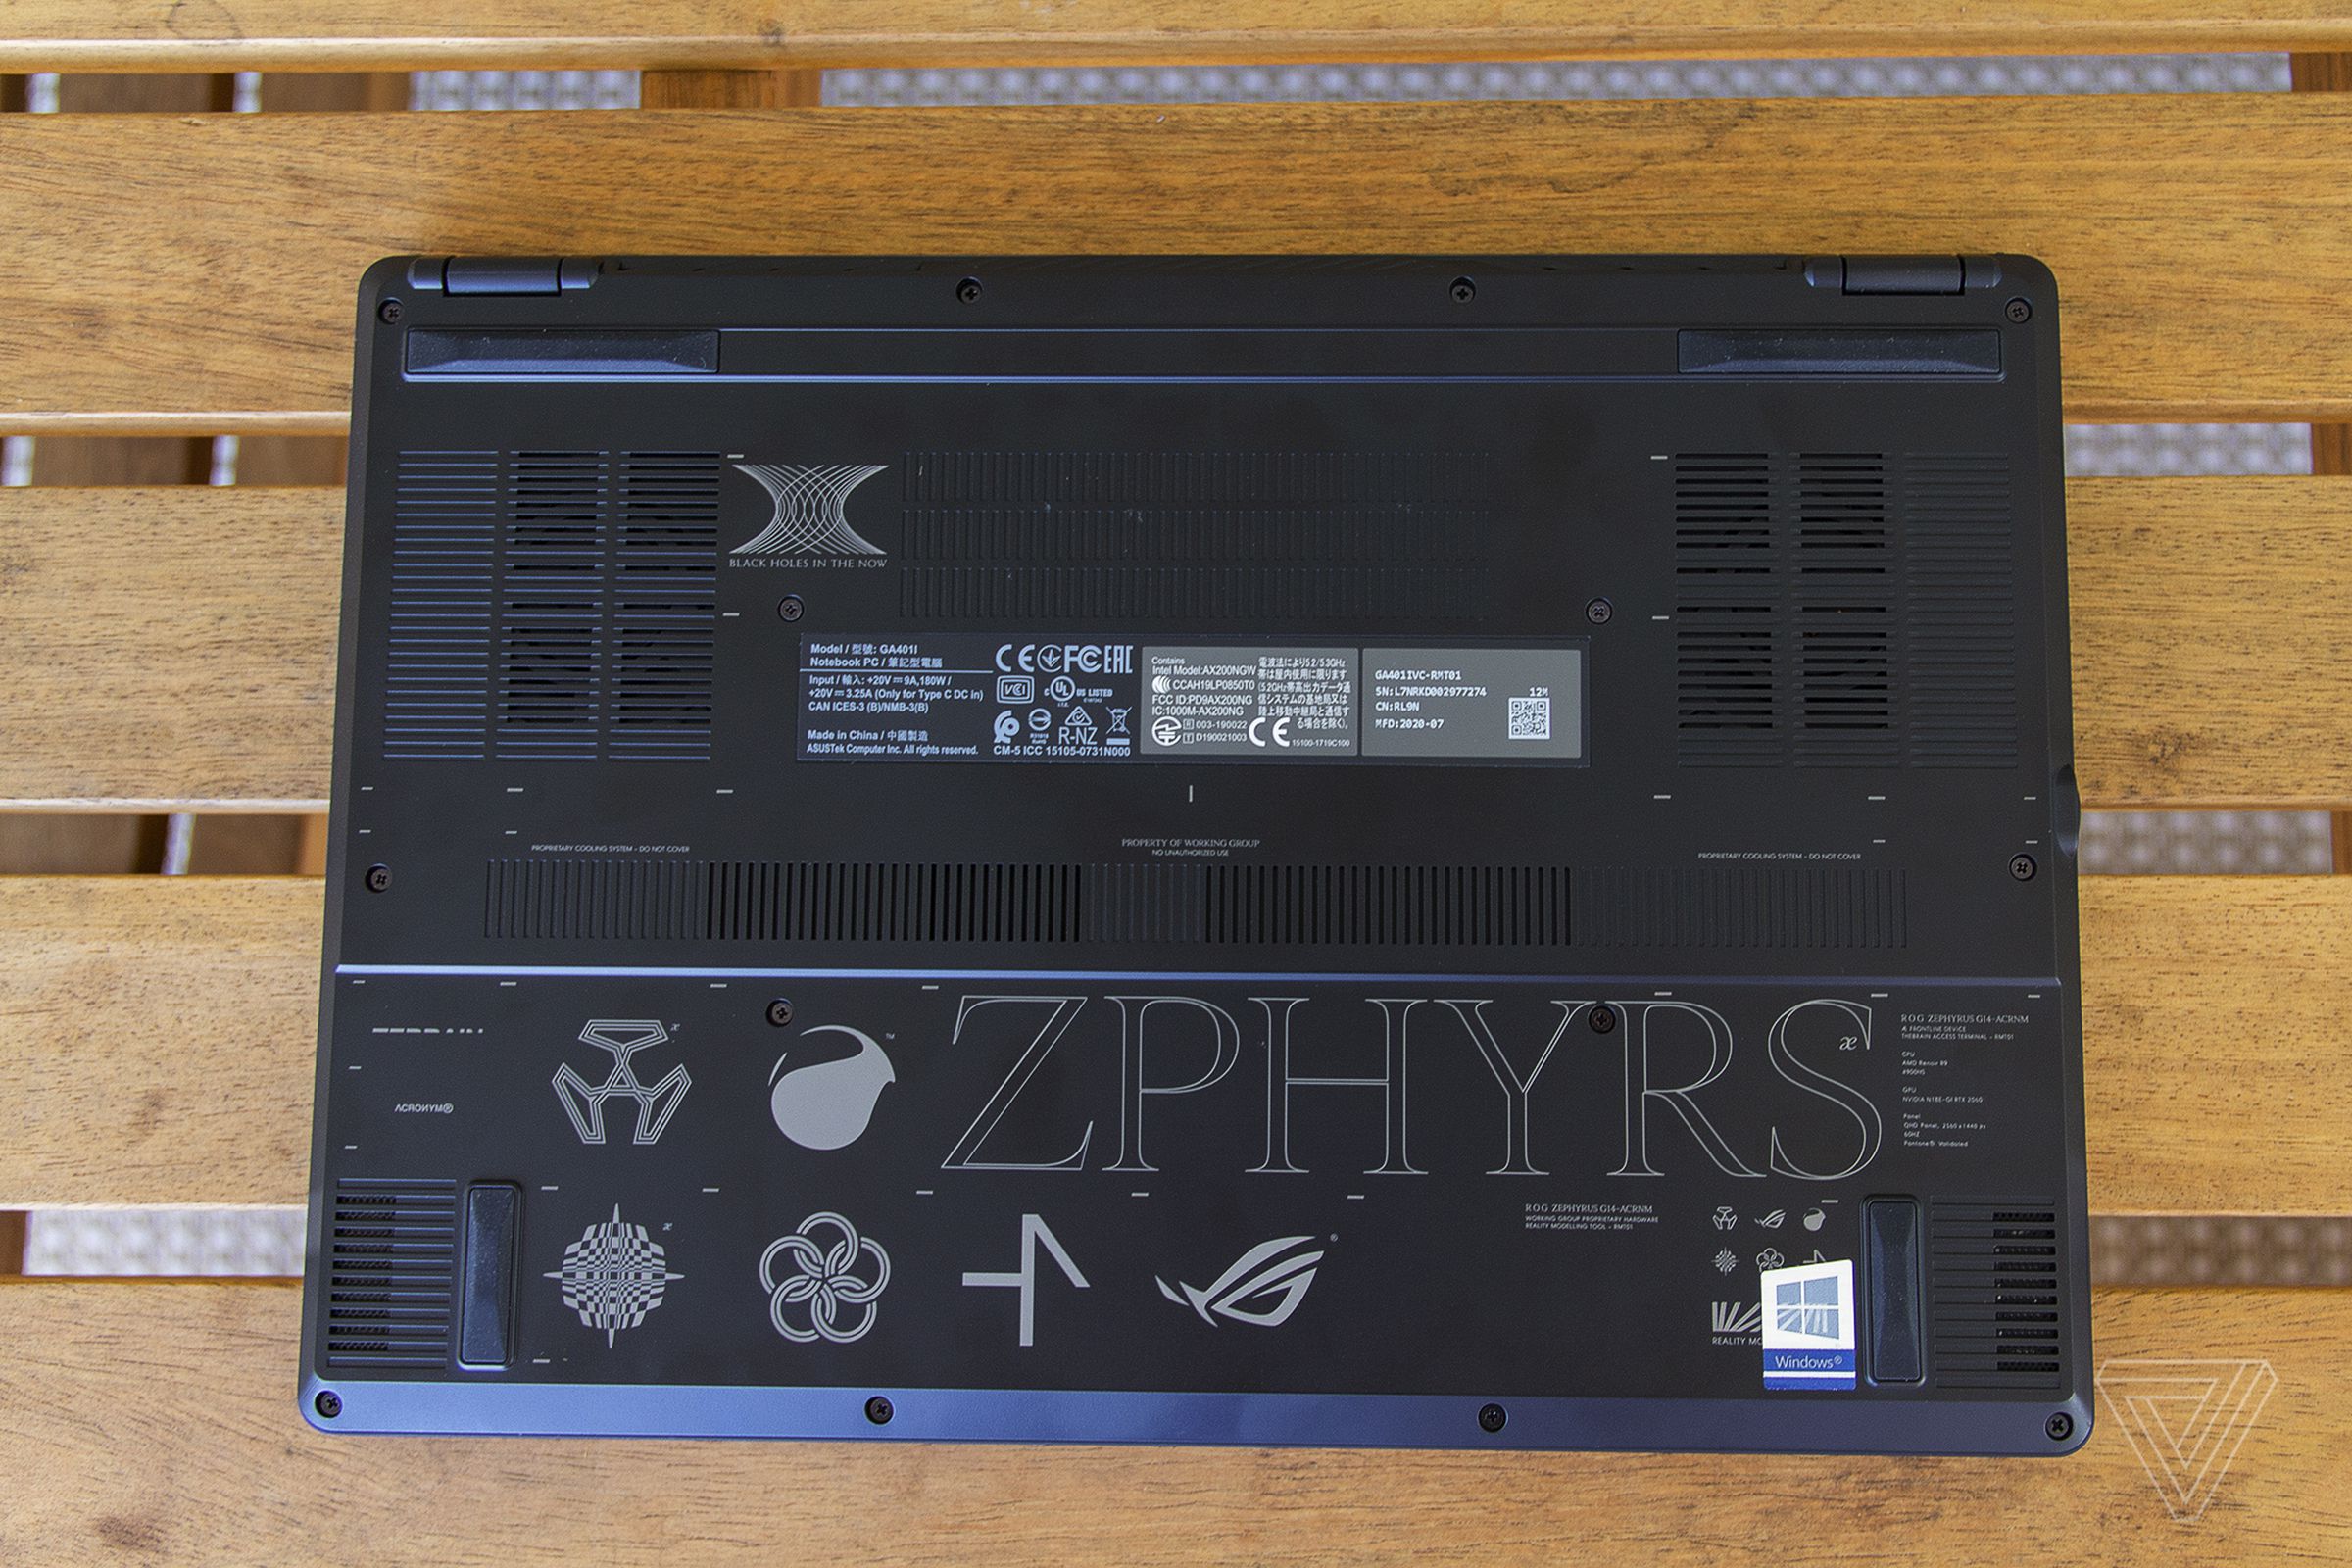 The bottom of the Asus Zephyrus G14 ACRNM.